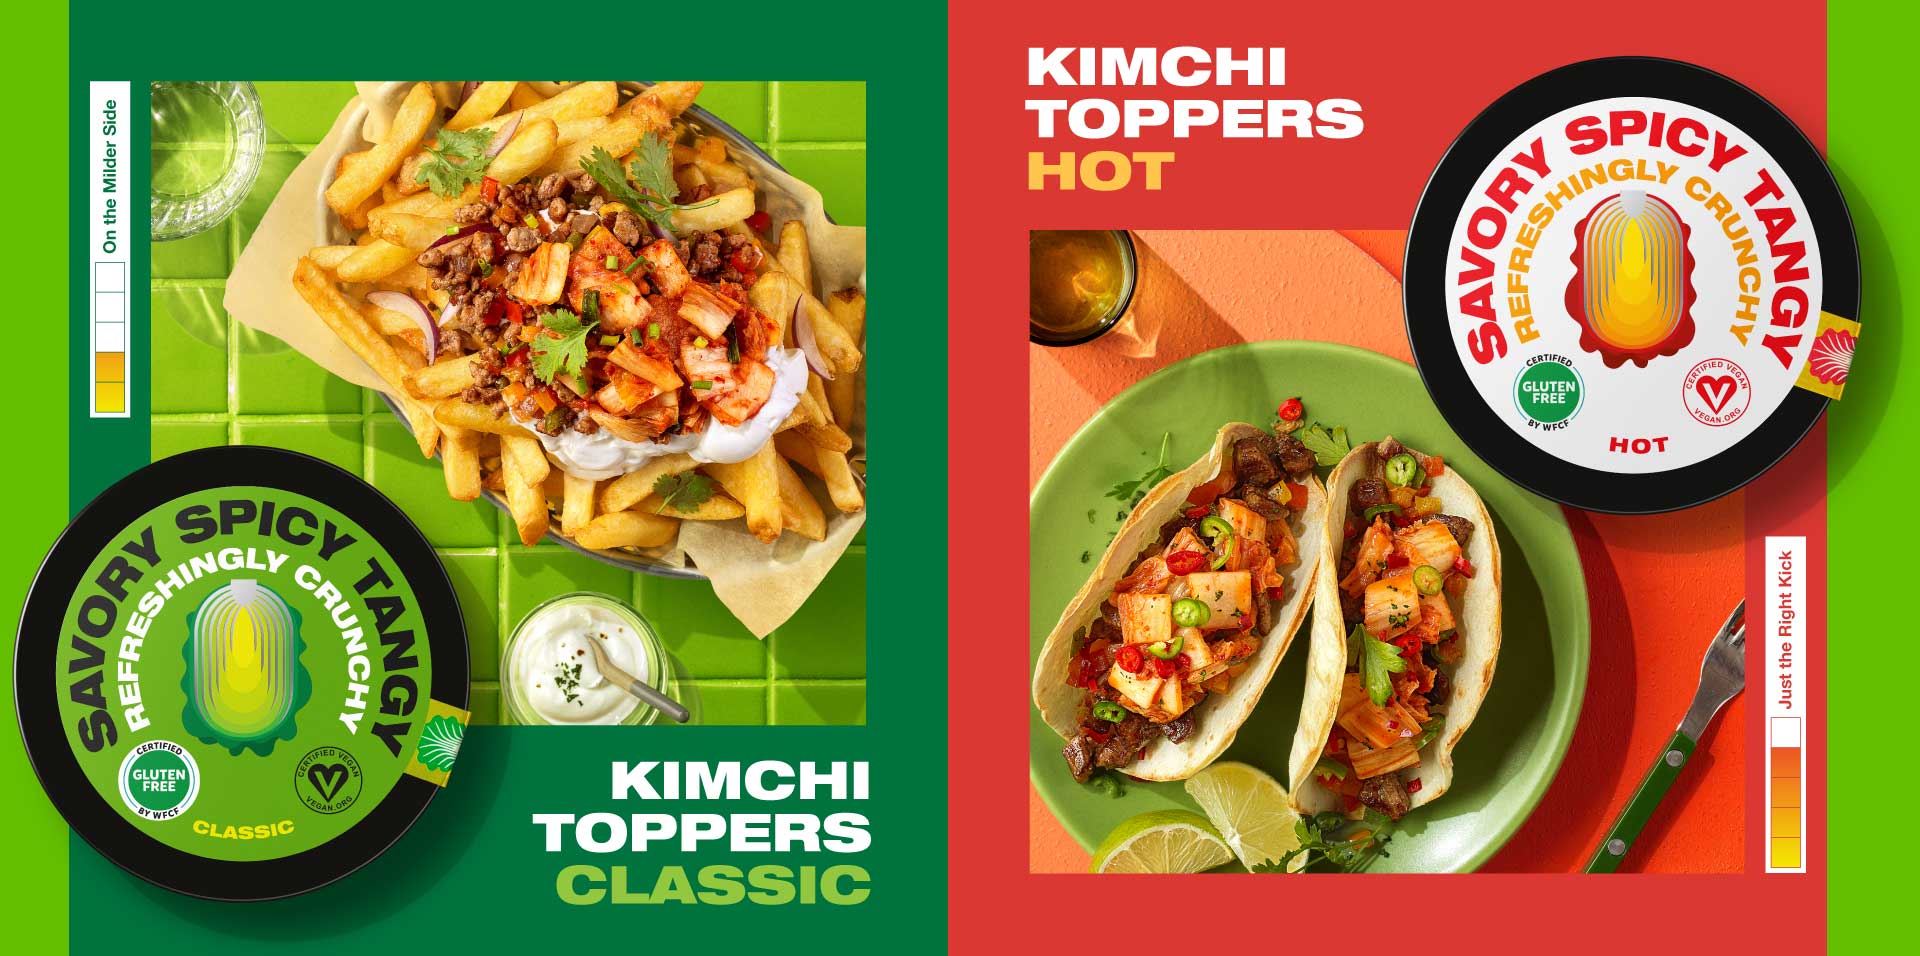 Comes in two flavors, Kimchi Toppers Classic Flavor and Hot Flavor.